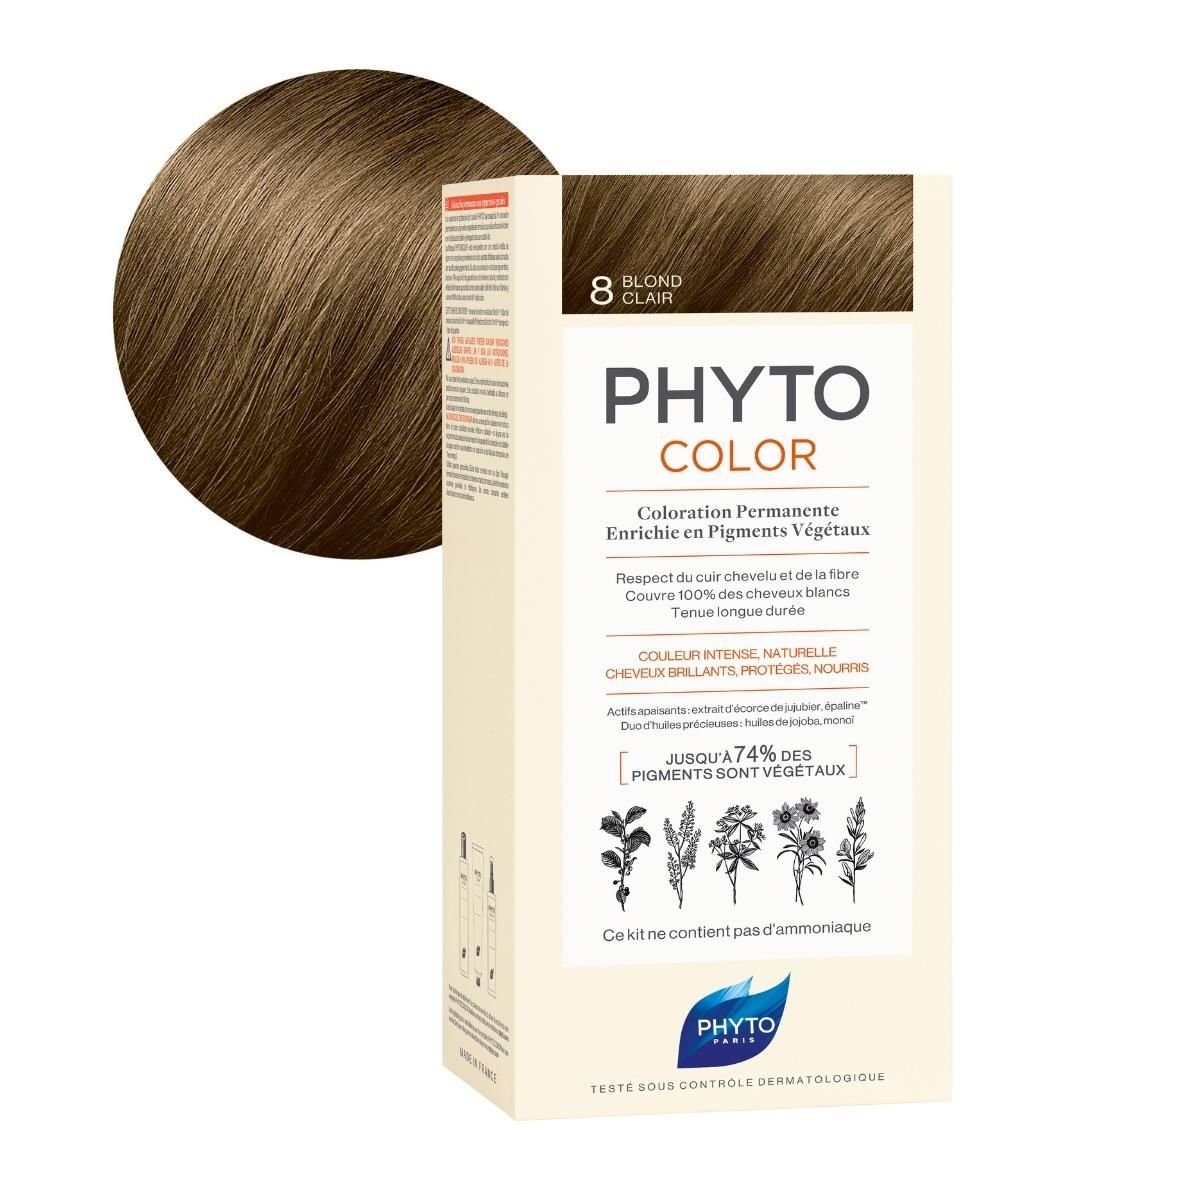 PHYTO COLOR 8 BLD CLAIR